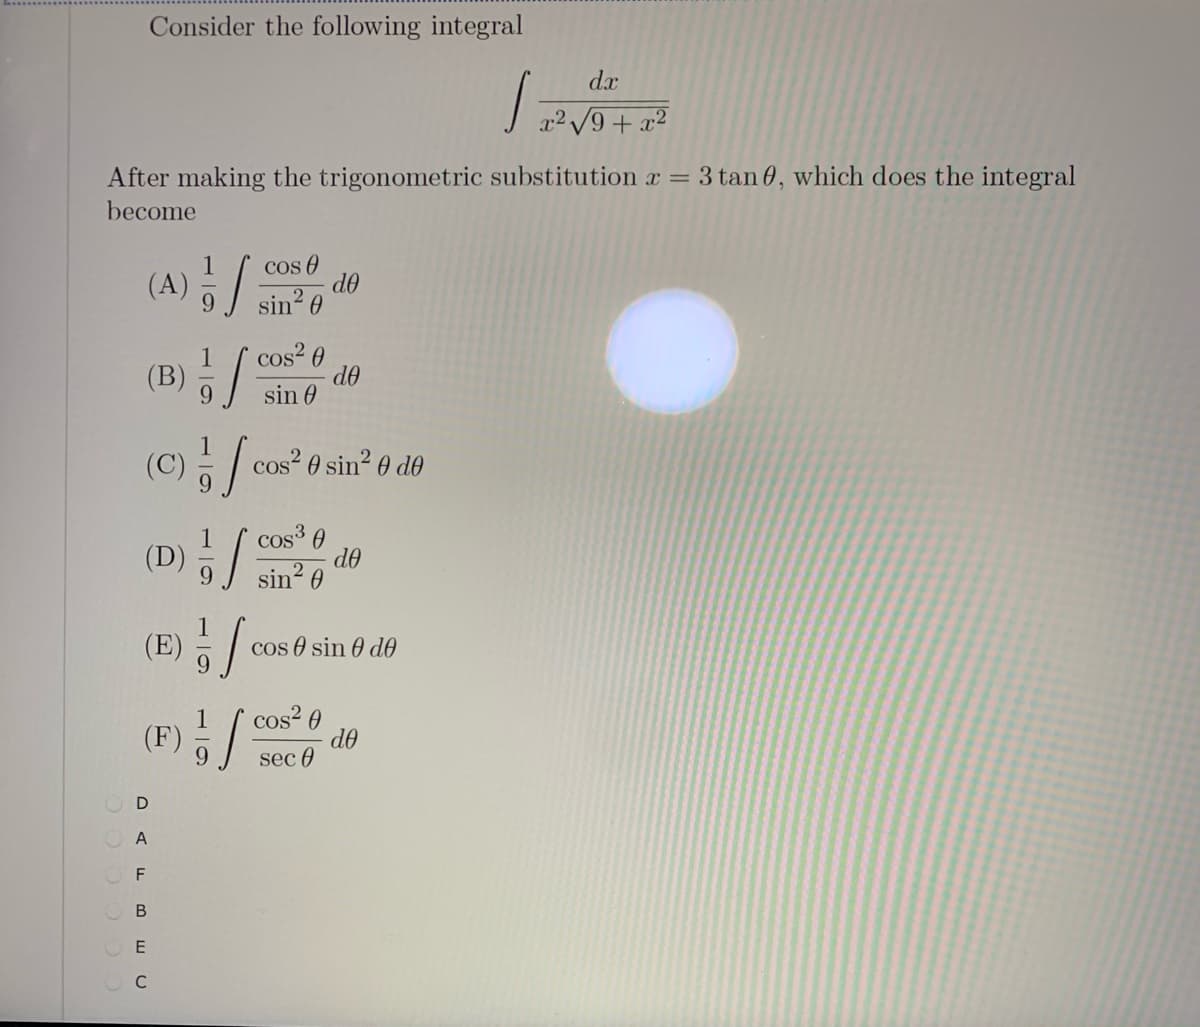 Consider the following integral
d.x
After making the trigonometric substitution x =
3 tan 0, which does the integral
become
(A) 5/:
cos O
do
sin?
cos? 0
de
sin 0
(B)
(C) - / cos? 0 sin² 0 d0
(D
cos³ 0
de
sin? 0
(E)
cos e sin 0 dO
9.
1
(F)
cos? 0
do
sec 0
O A
O F
O B
C
